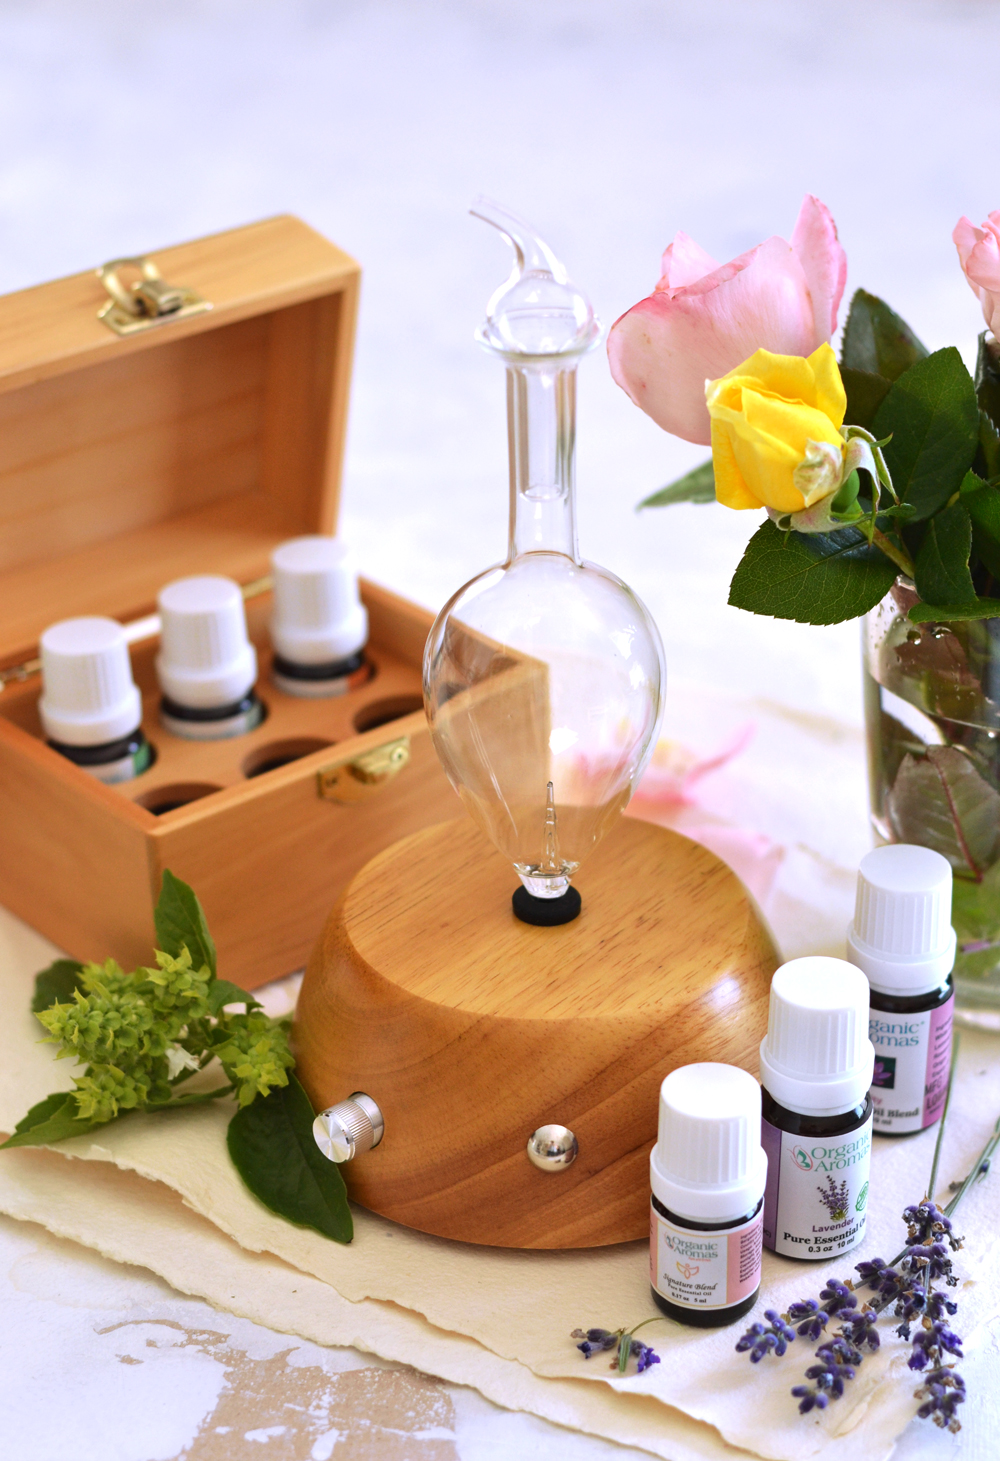 Diffusing Essential oils with The Nebulizing Diffuser ... it's like a dream come true! Learn all about it!